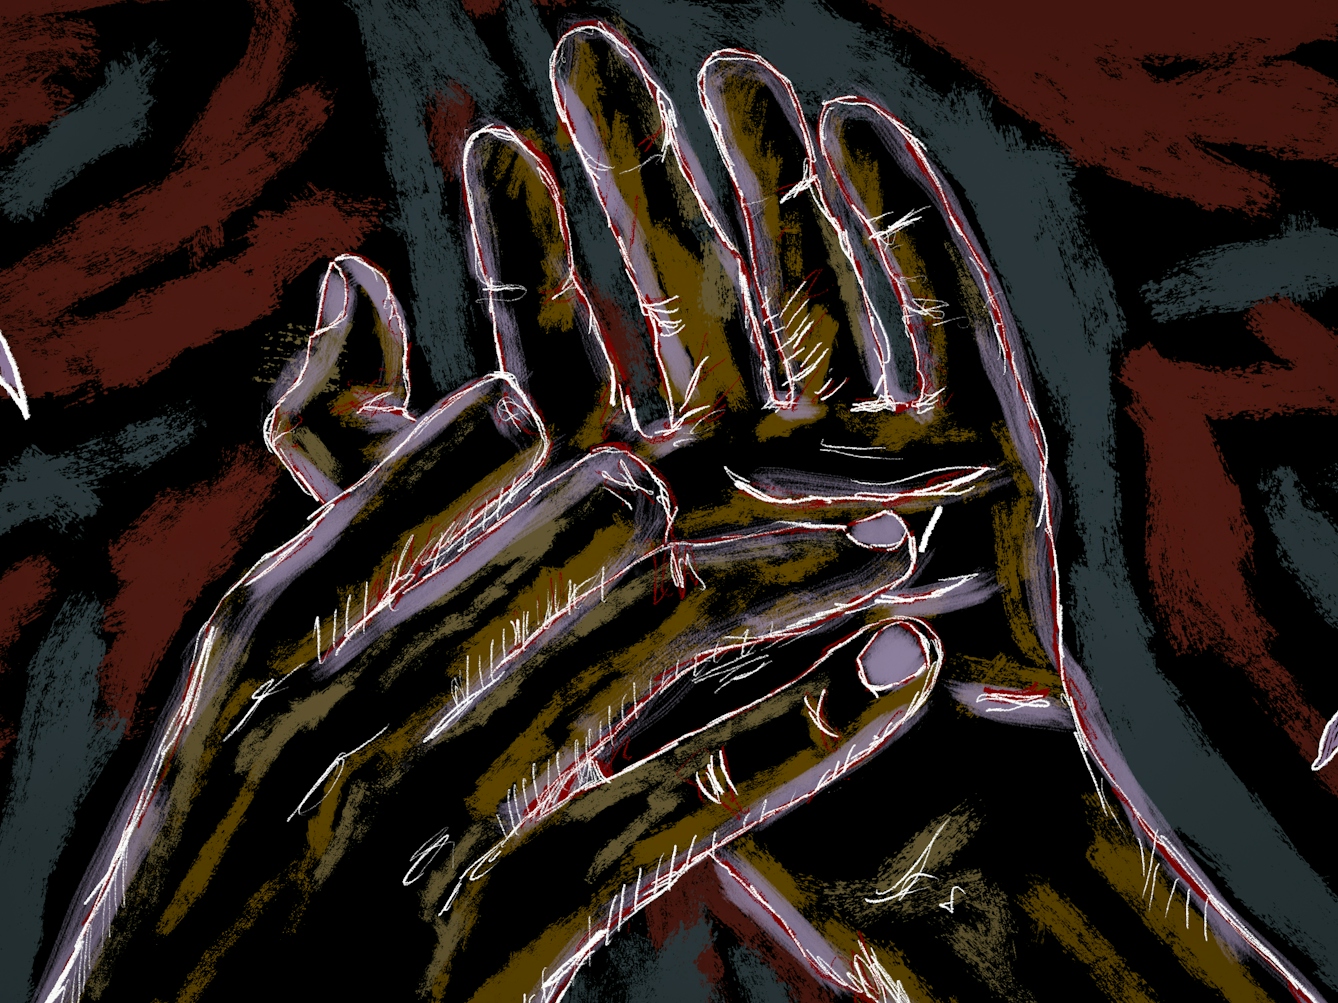 Detail from a larger colour digital artwork showing a figurative study of a pair of hands gracefully suspended in mid air, visible from just above the wrists. The hand on the right is held palm towards us, fingers stretched out. The hand on the left is facing away from us, fingers lightly touching the palm of the other hand. The background is made up of dark textured rough lines of dark red, dark blue greys and blacks, punctuated by white outlined purple leaf-like plants.